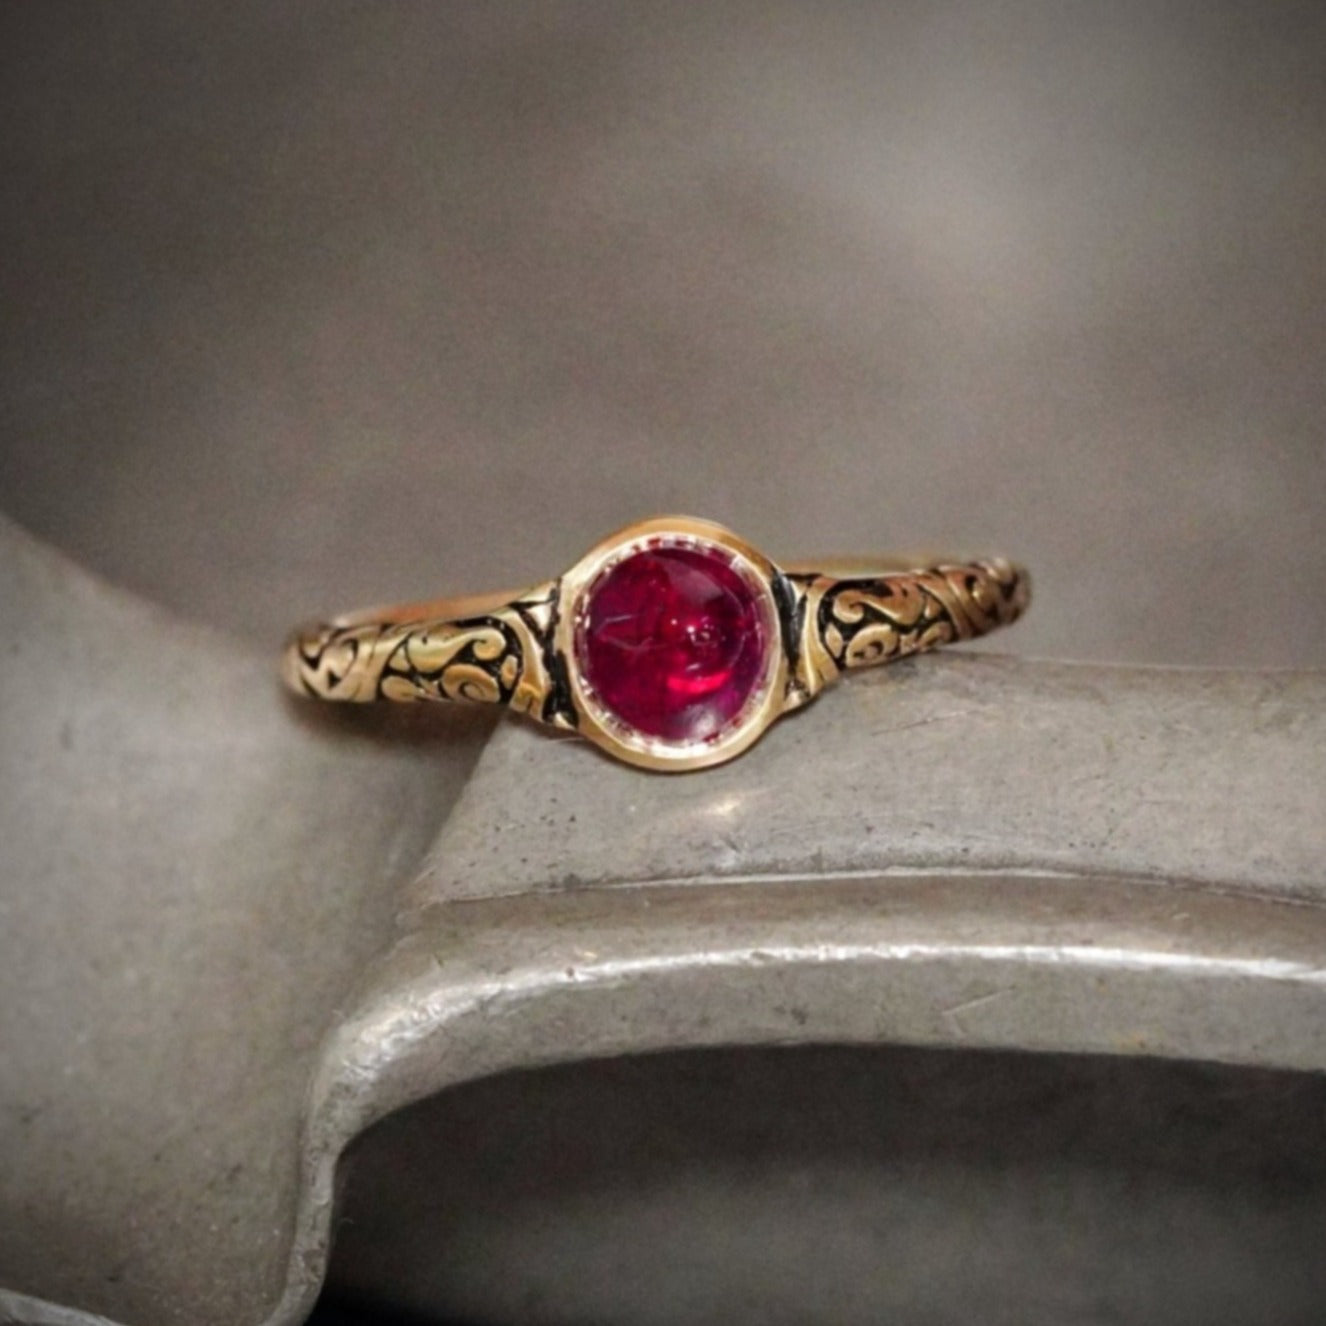 Cherry Red 0.96ct Sugarloaf No Heat Burma Ruby Ring in 18K Gold